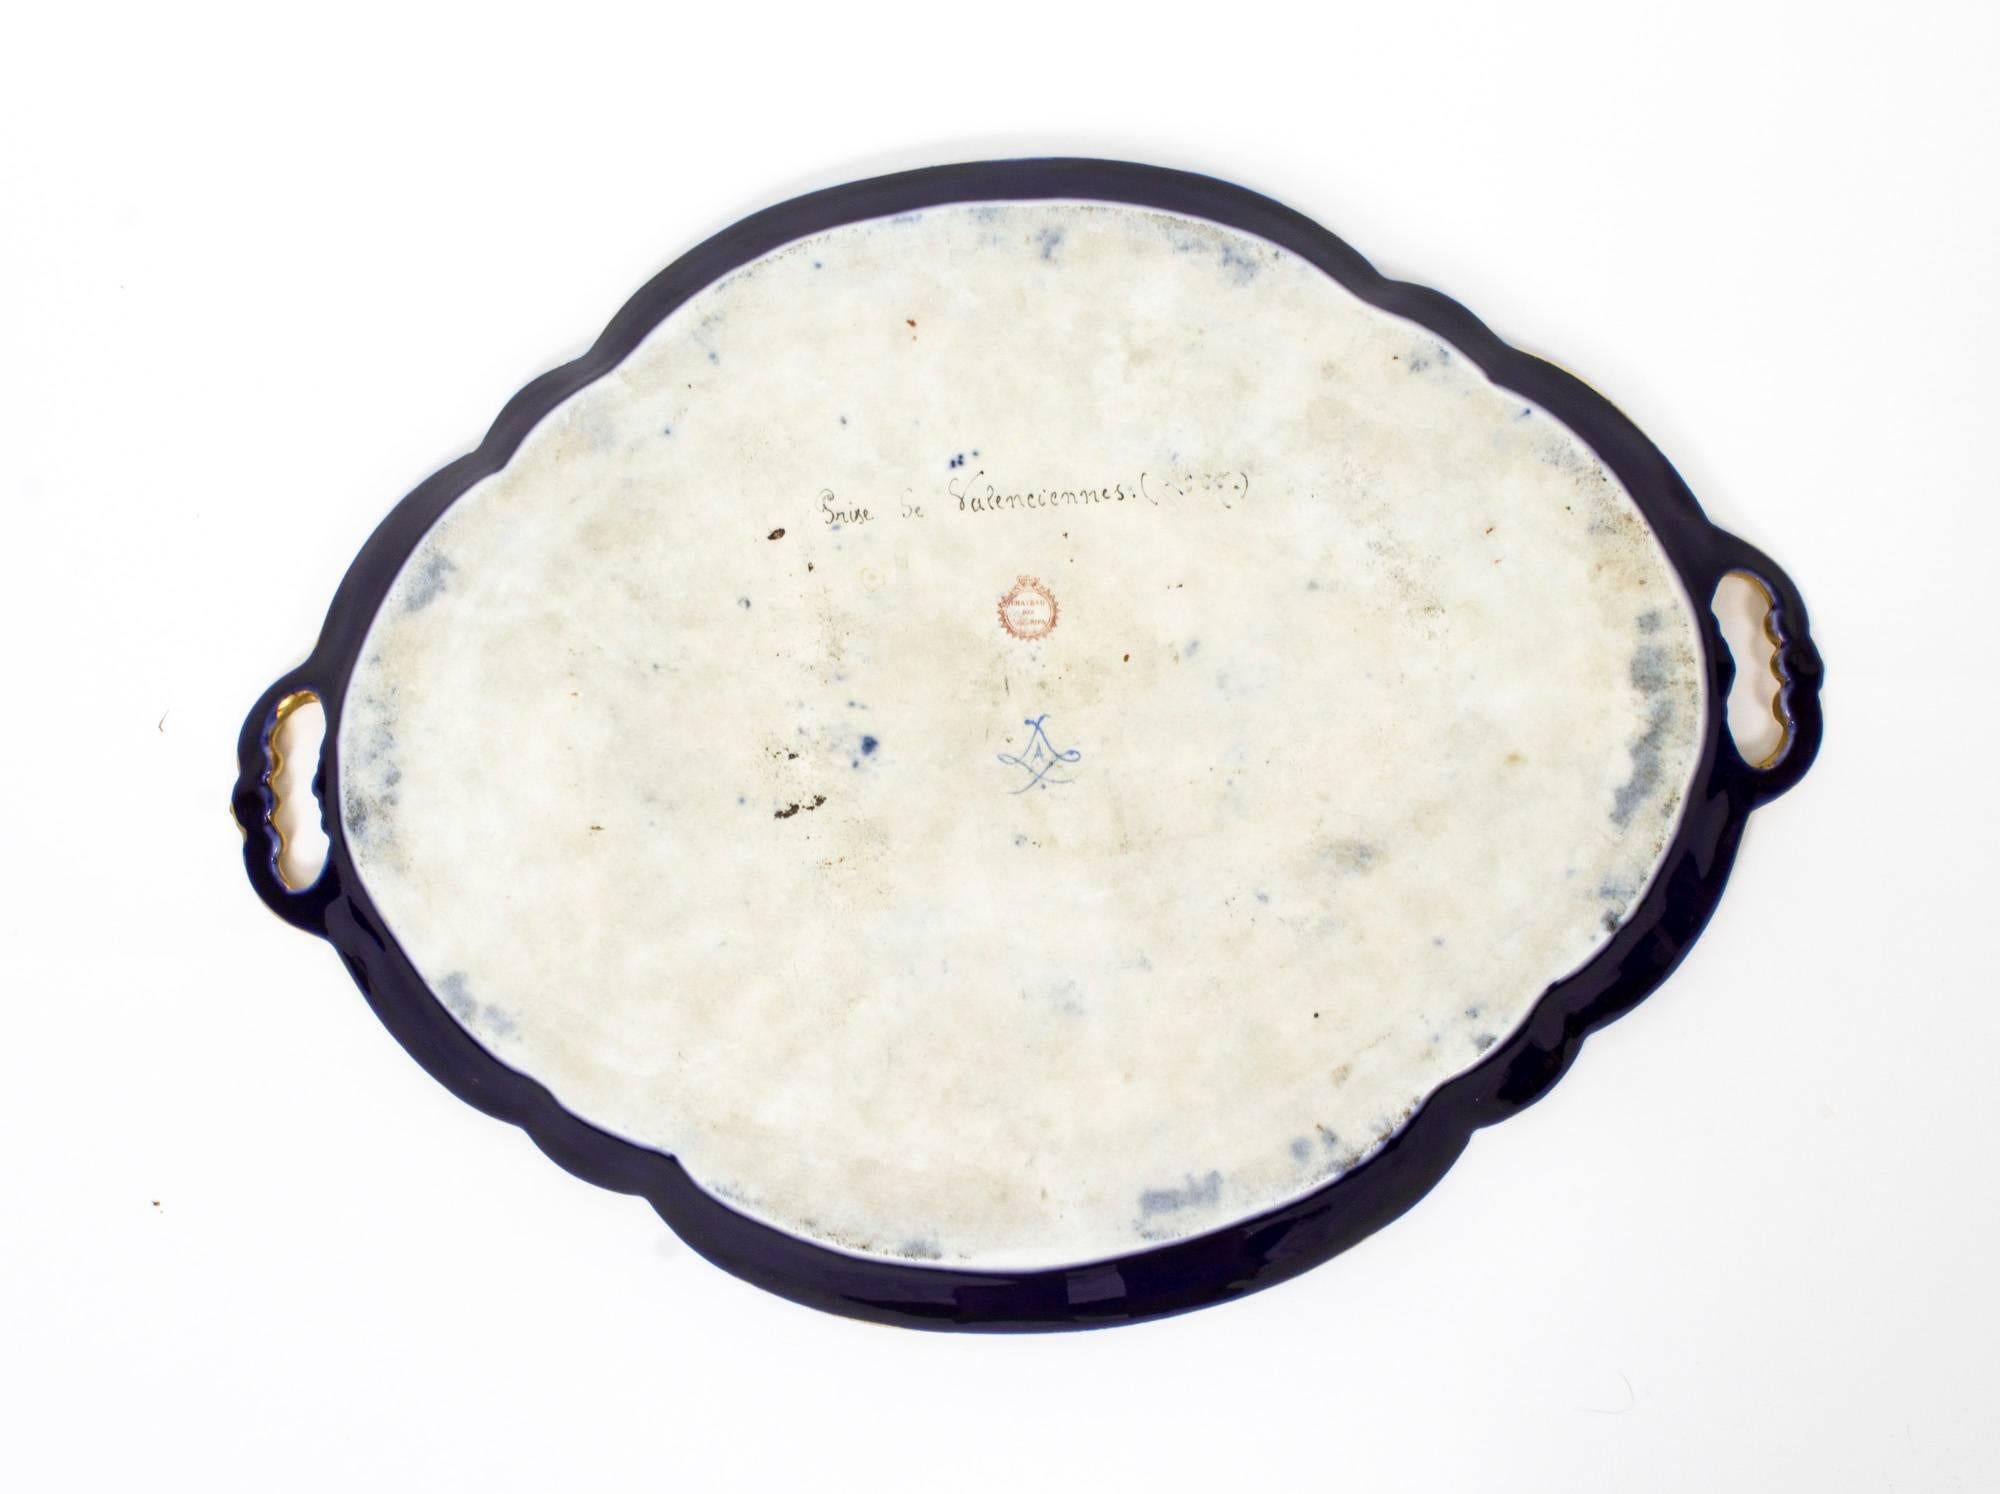 19th Century French Sevres Porcelain Tray Signed Moreaux In Excellent Condition For Sale In London, GB